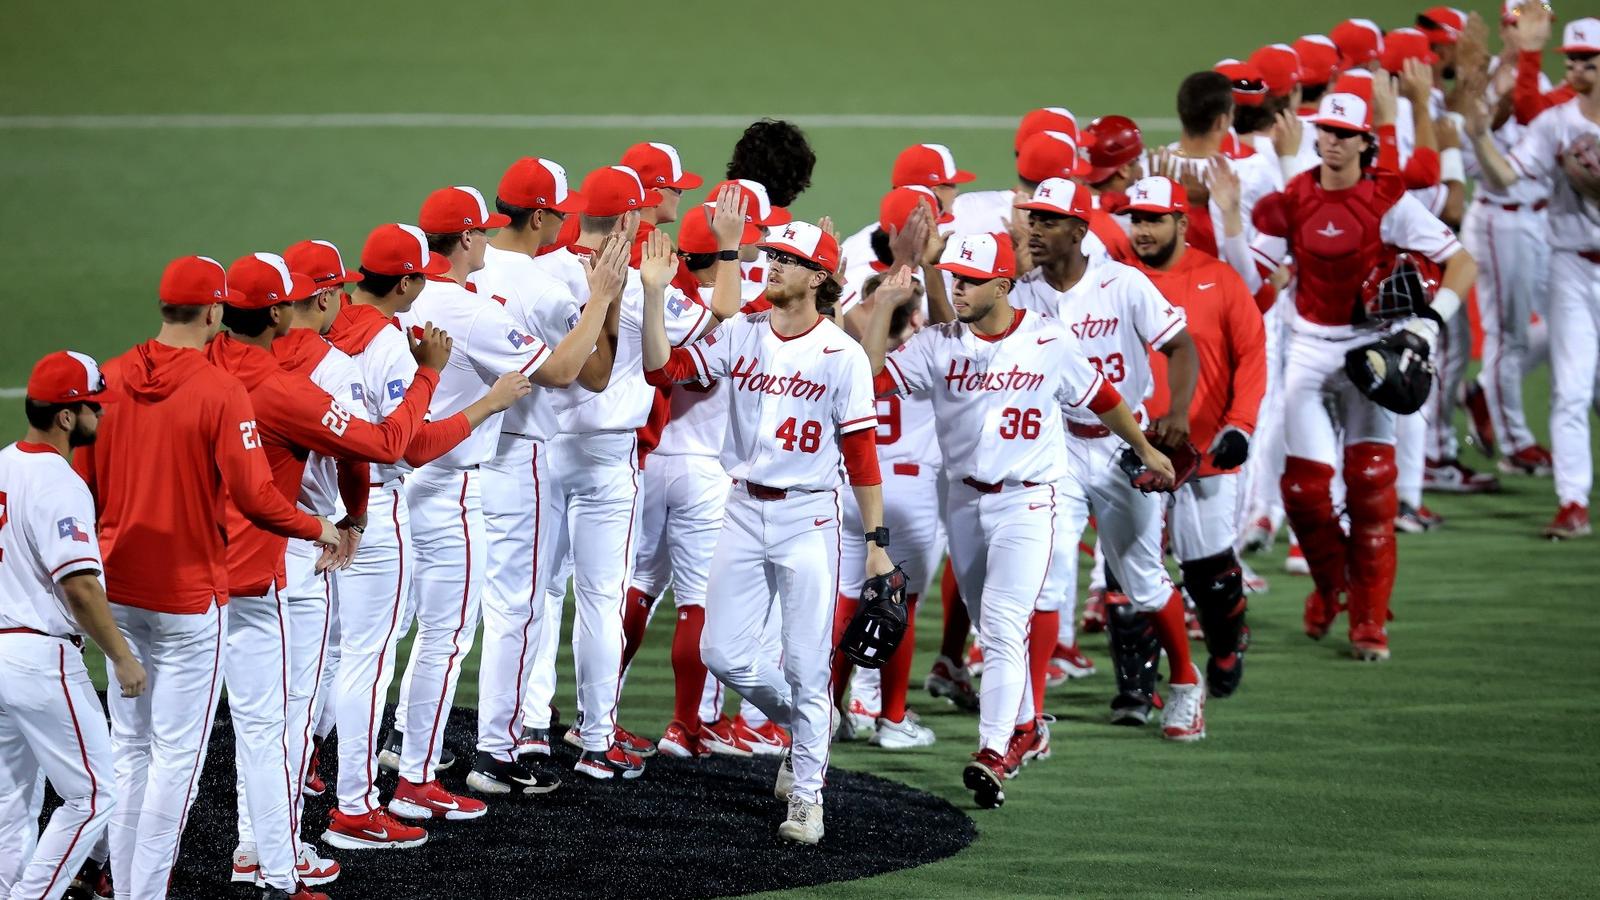 Houston Cougars Baseball Ready to Take on #1 Texas A&M Aggies: Match Preview and Player Highlights